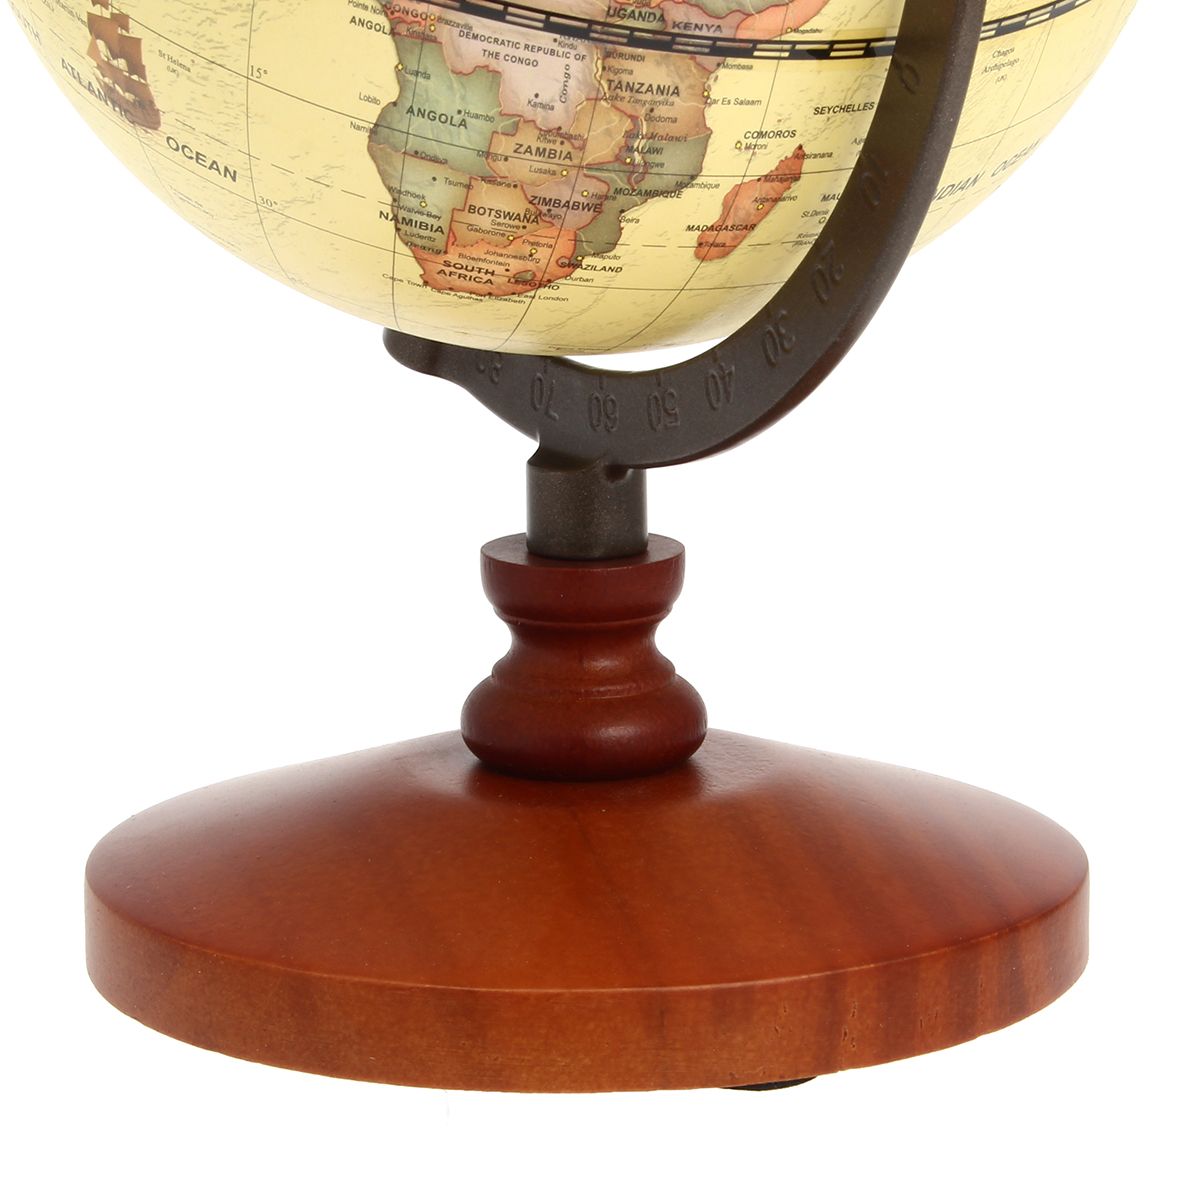 55quot-Vintage-Desktop-Table-Rotating-Earth-World-Map-Globe-Antique-Geography-Home-Decor-Gift-Toys-1266388